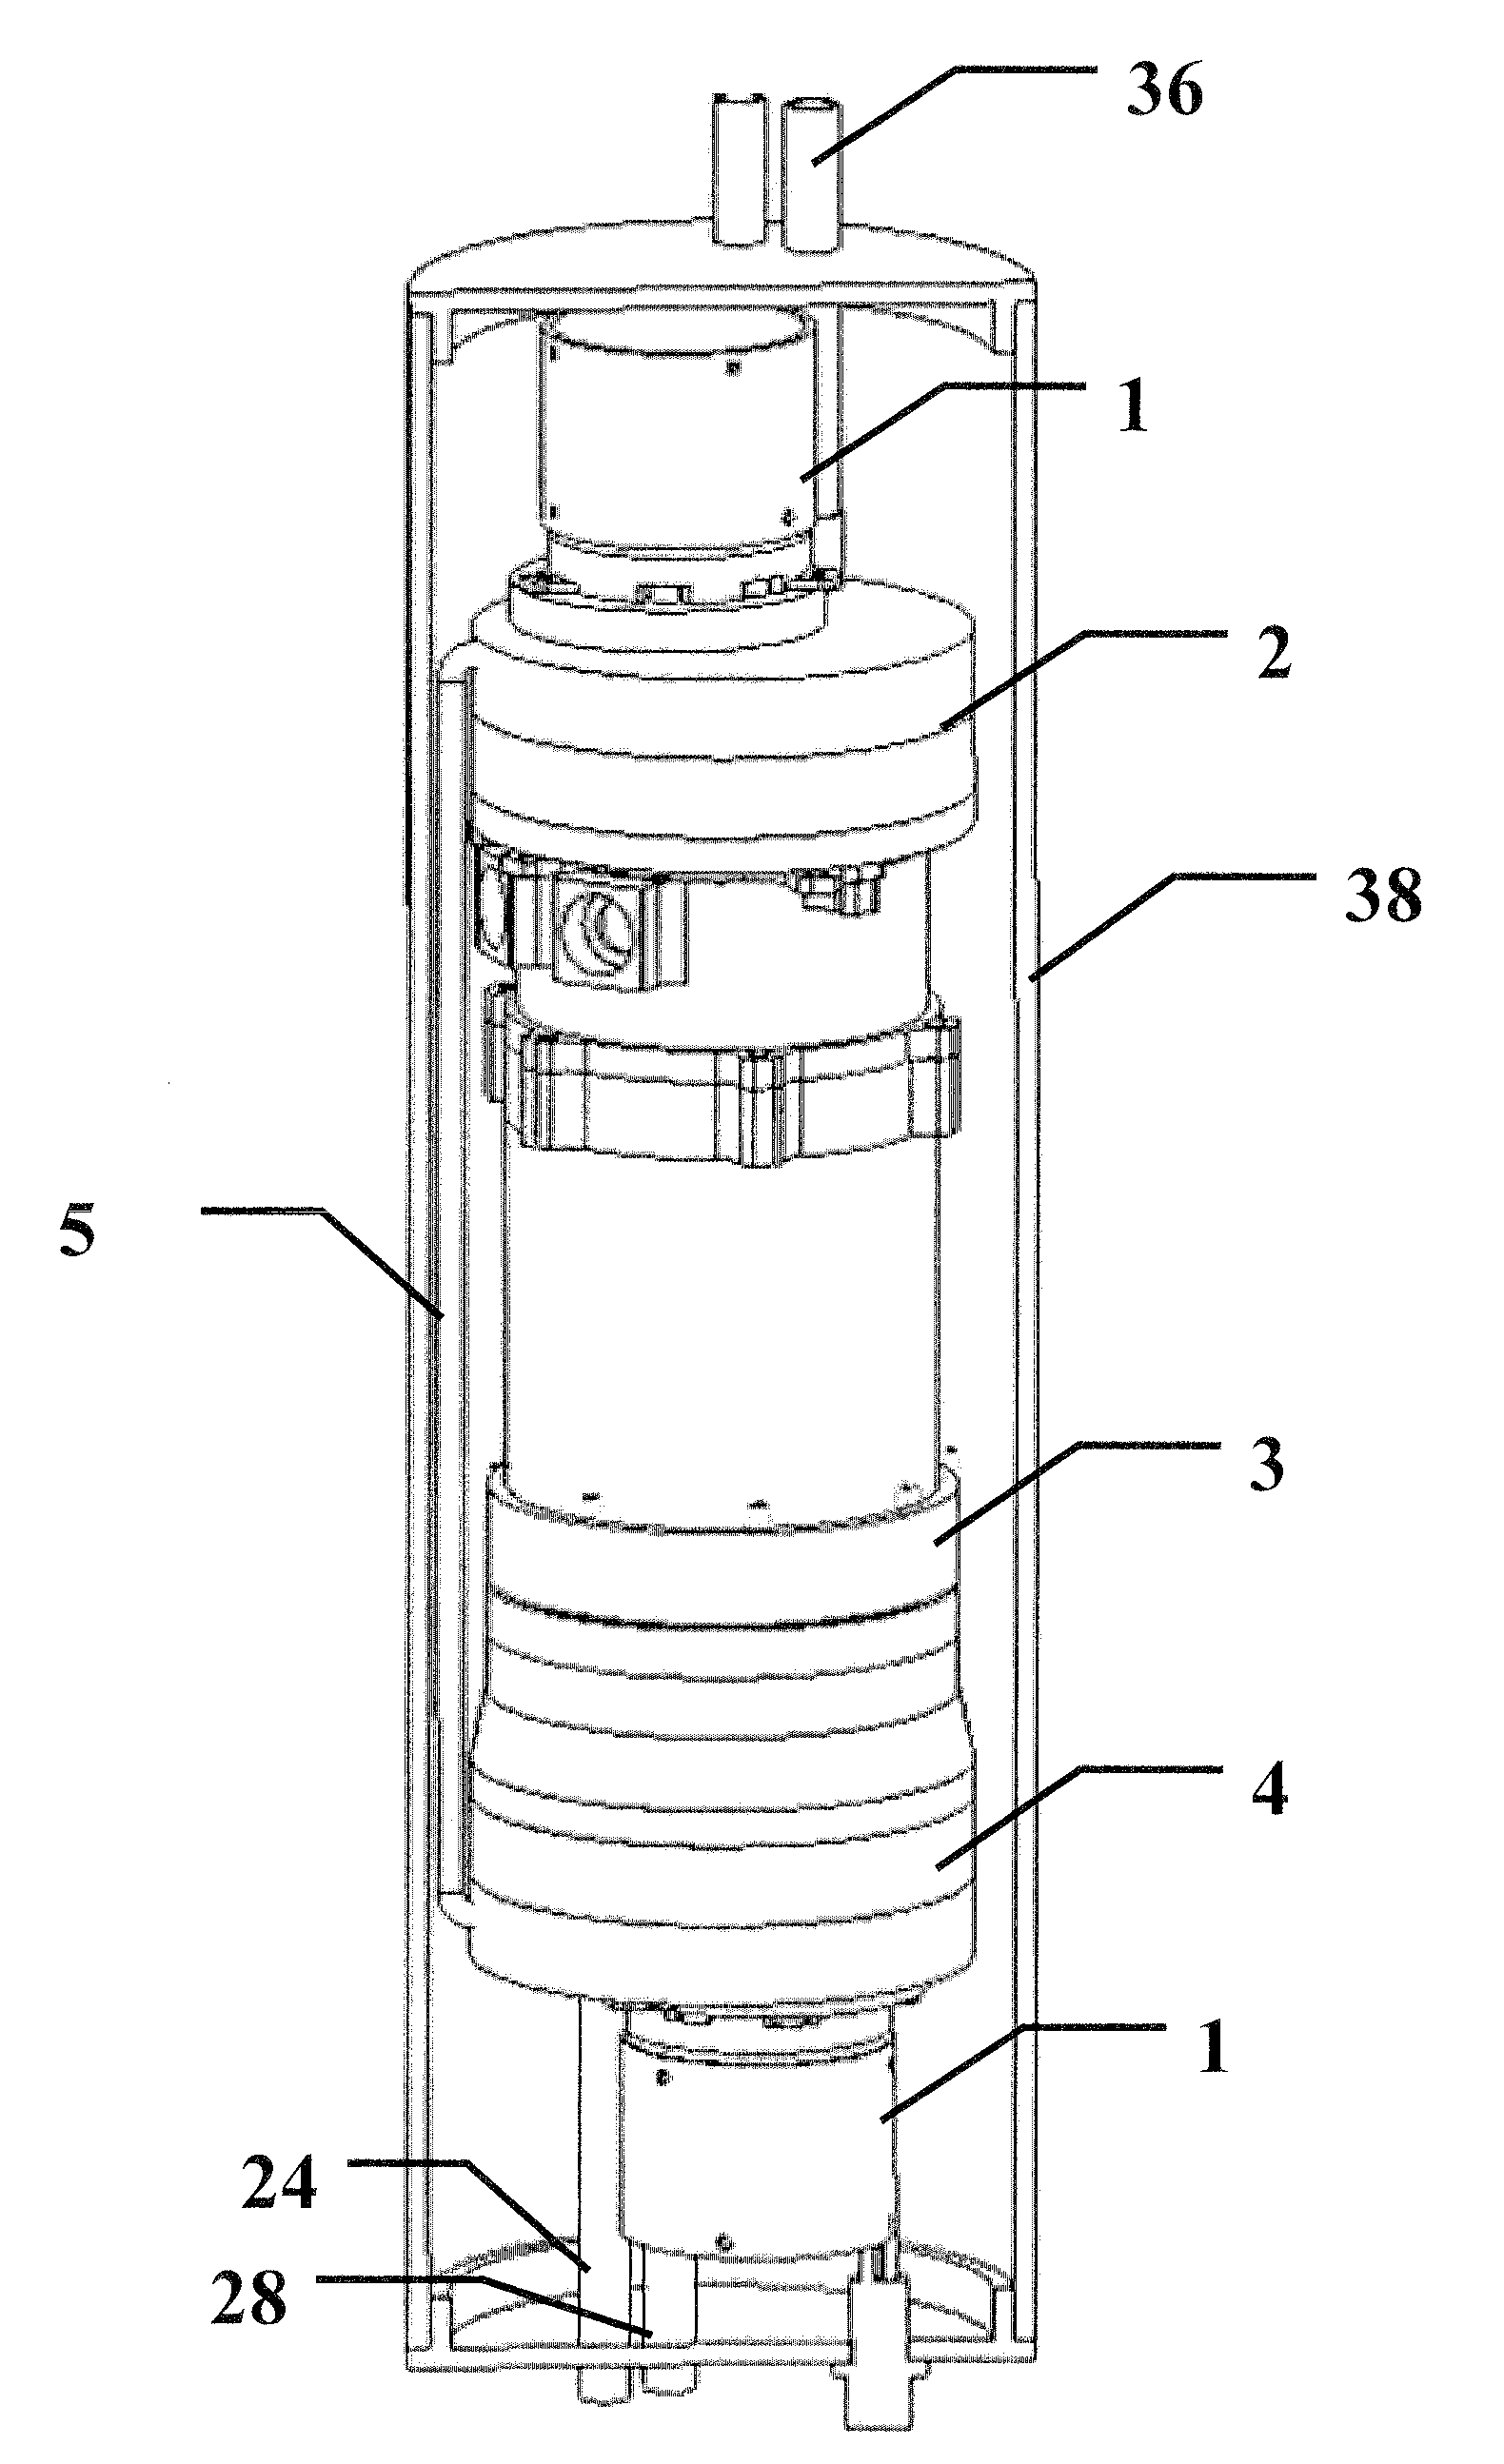 Method and Apparatus for Heating or Cooling